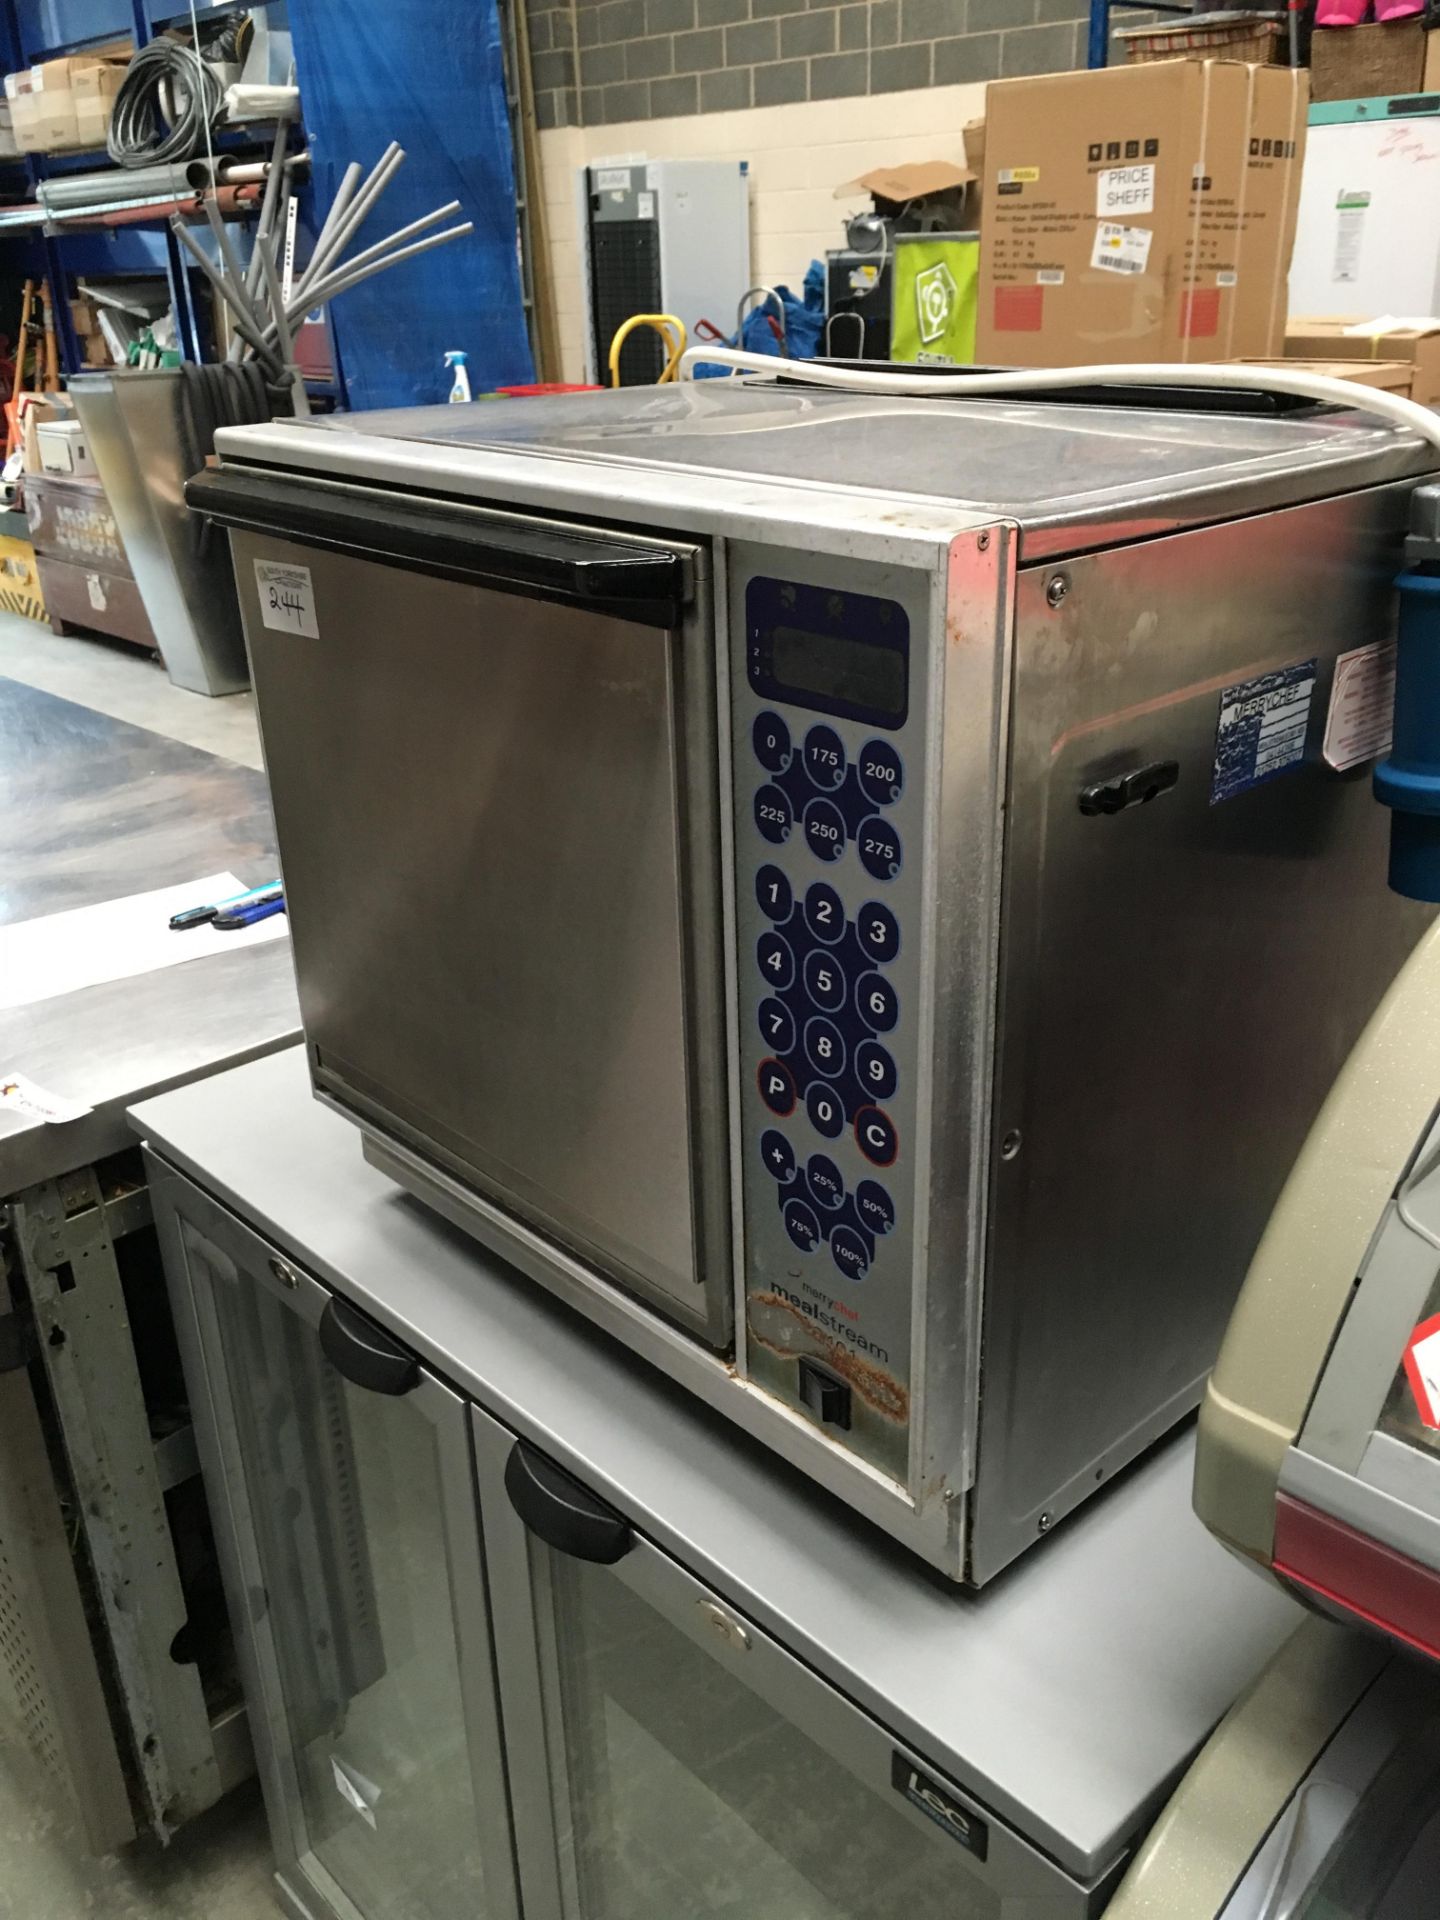 Merrychef Microwave Convection EC401 - Image 2 of 4